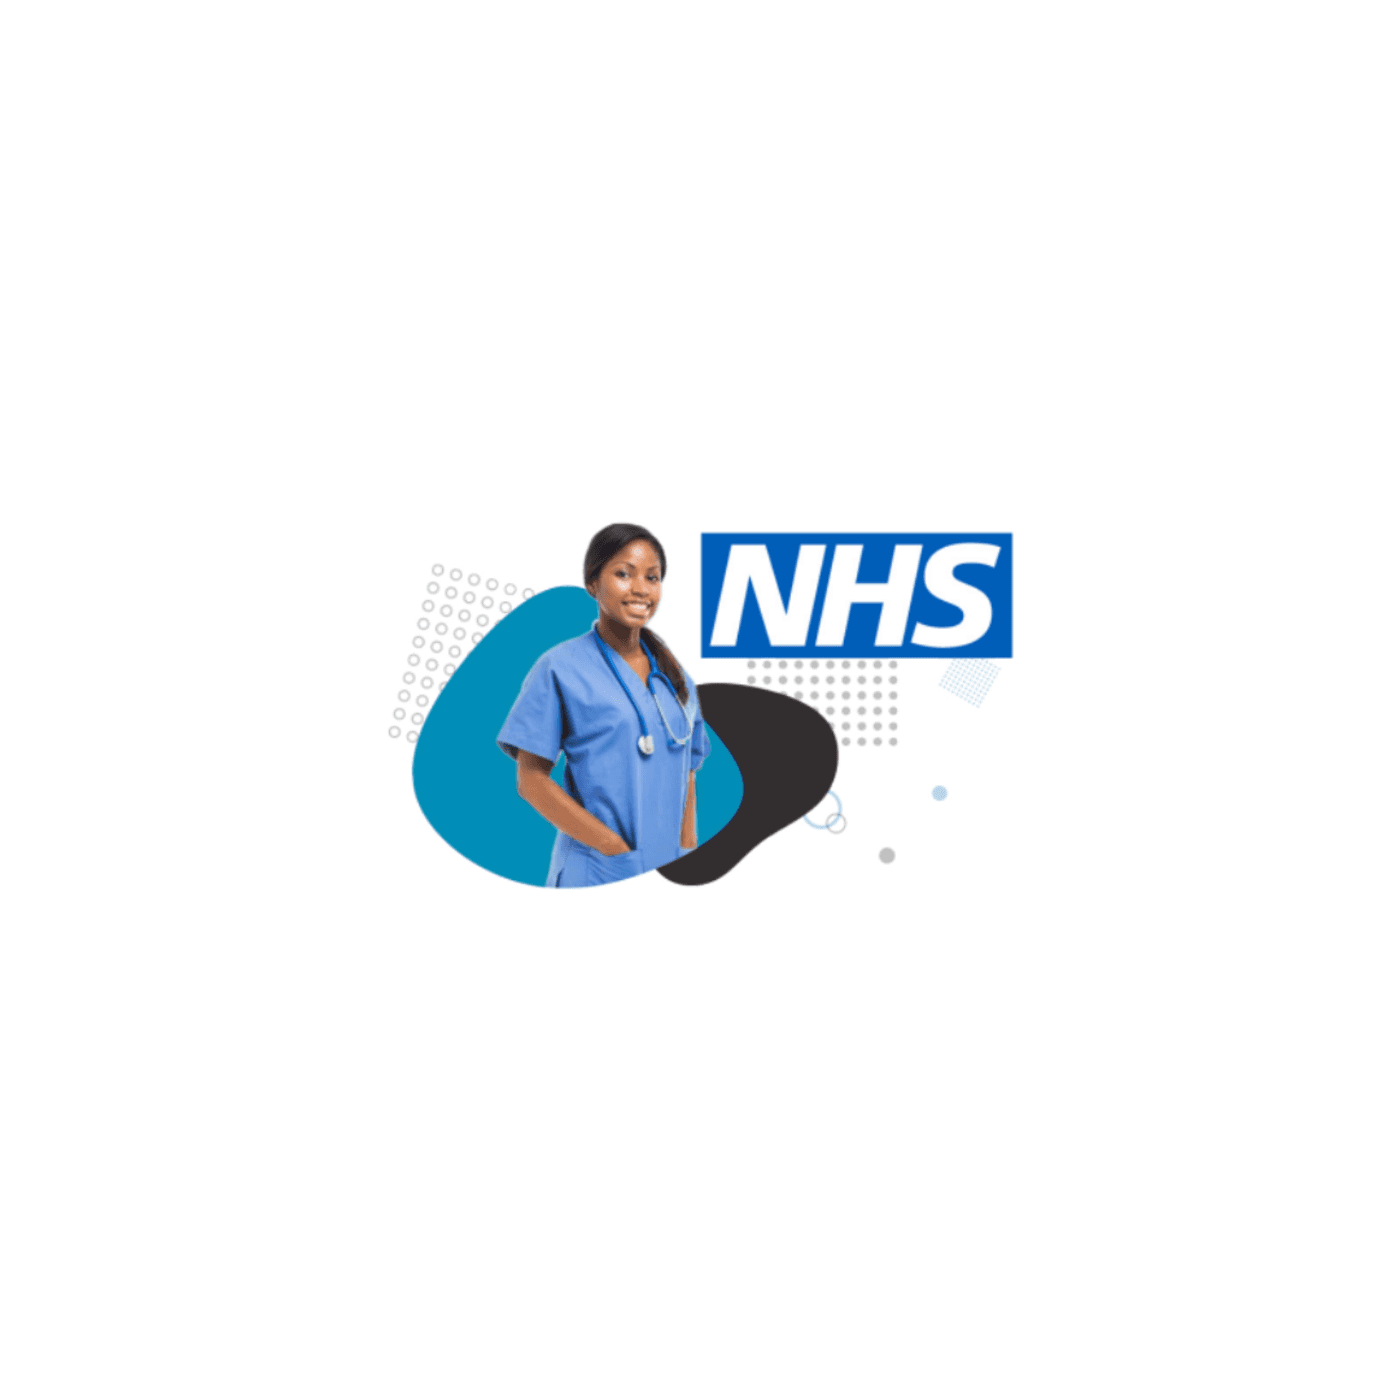 Trusted by the NHS